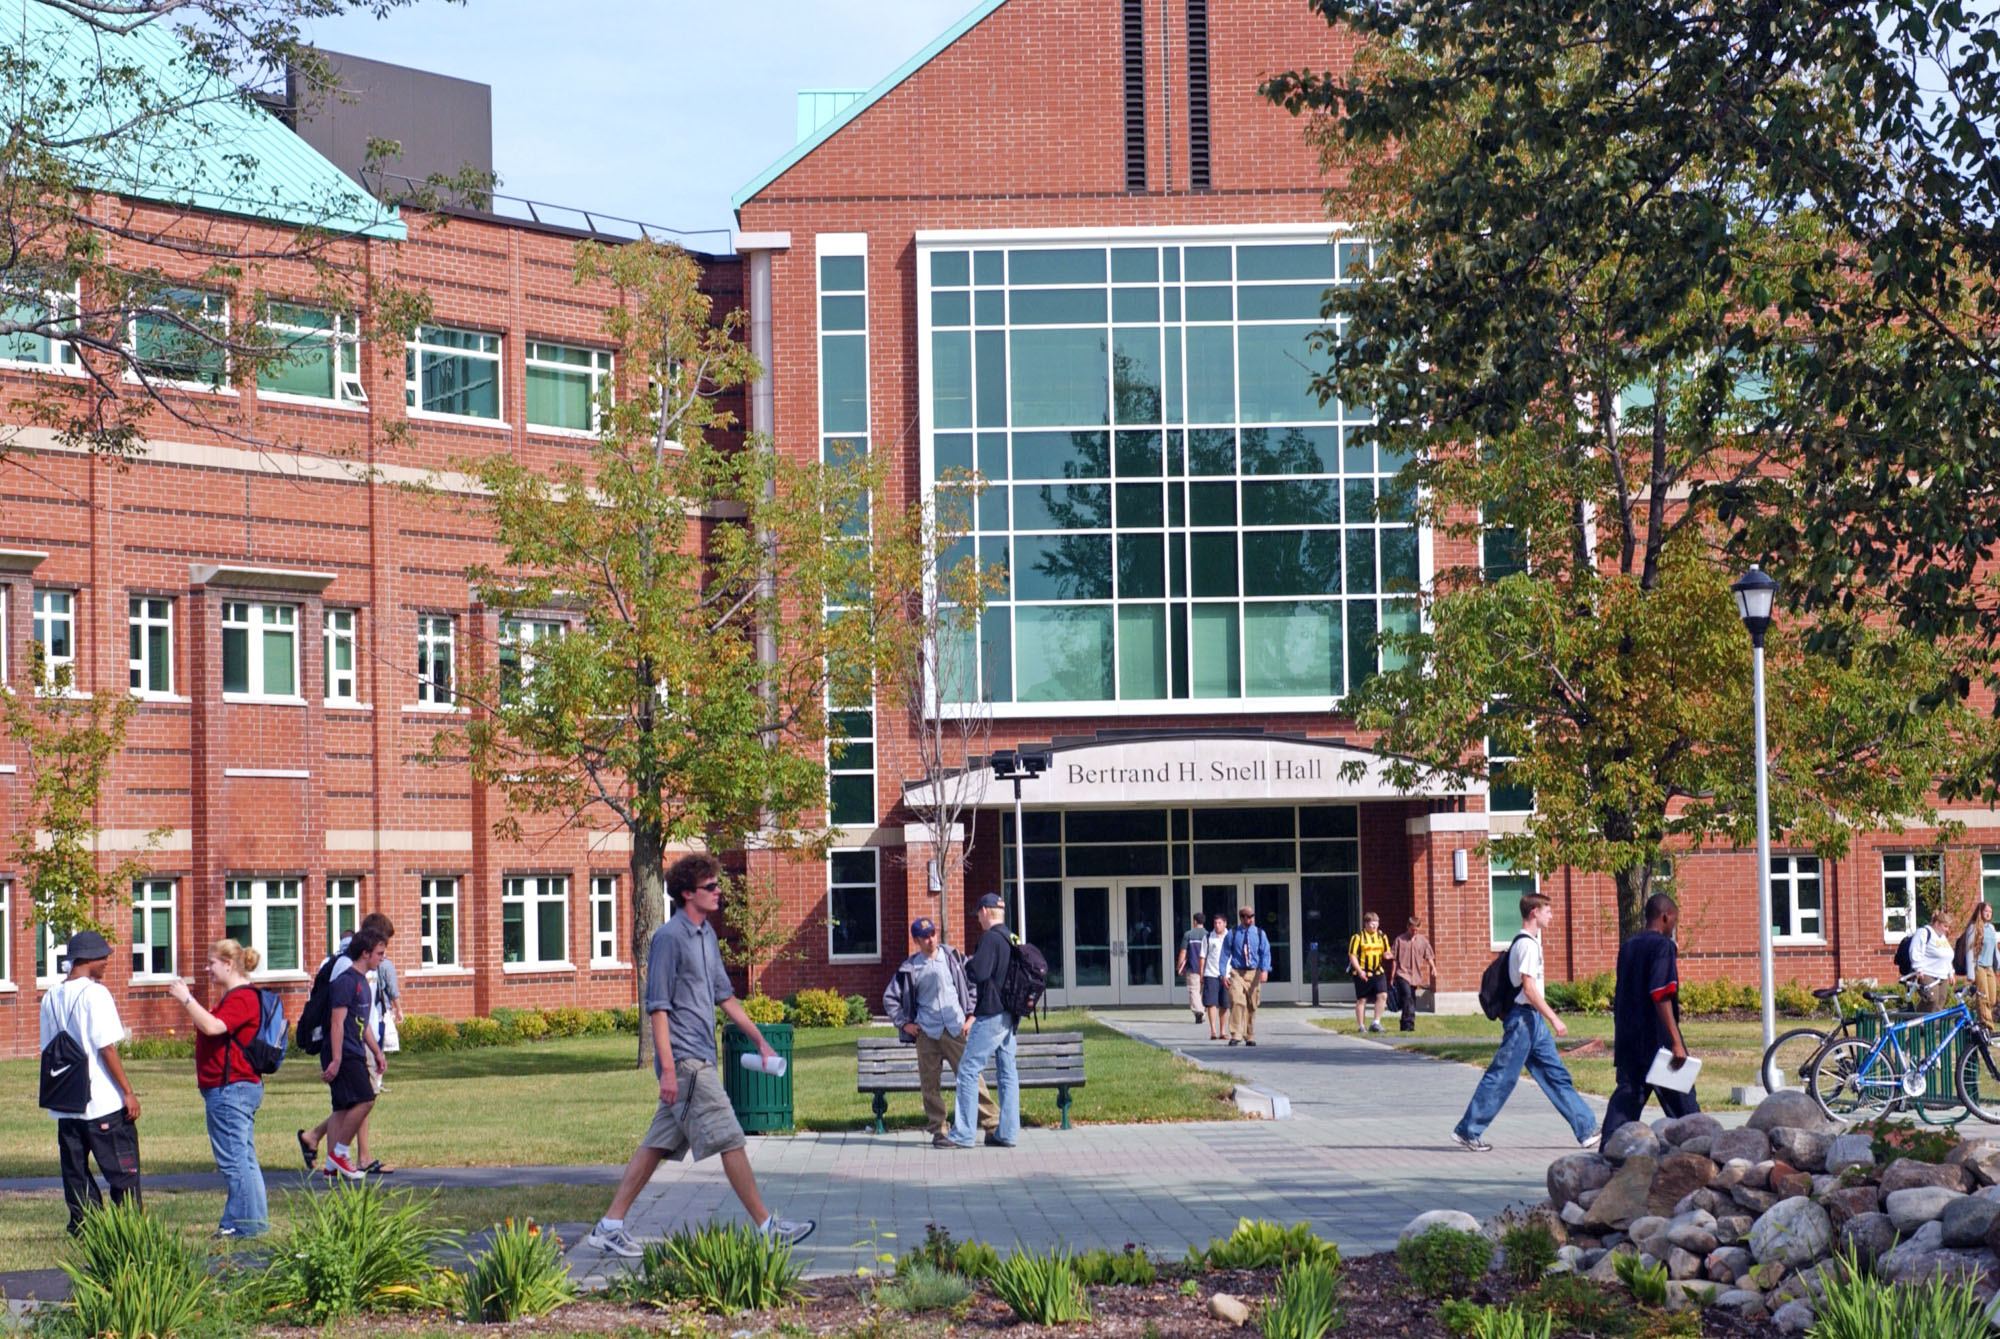 Students on campus at Clarkson University